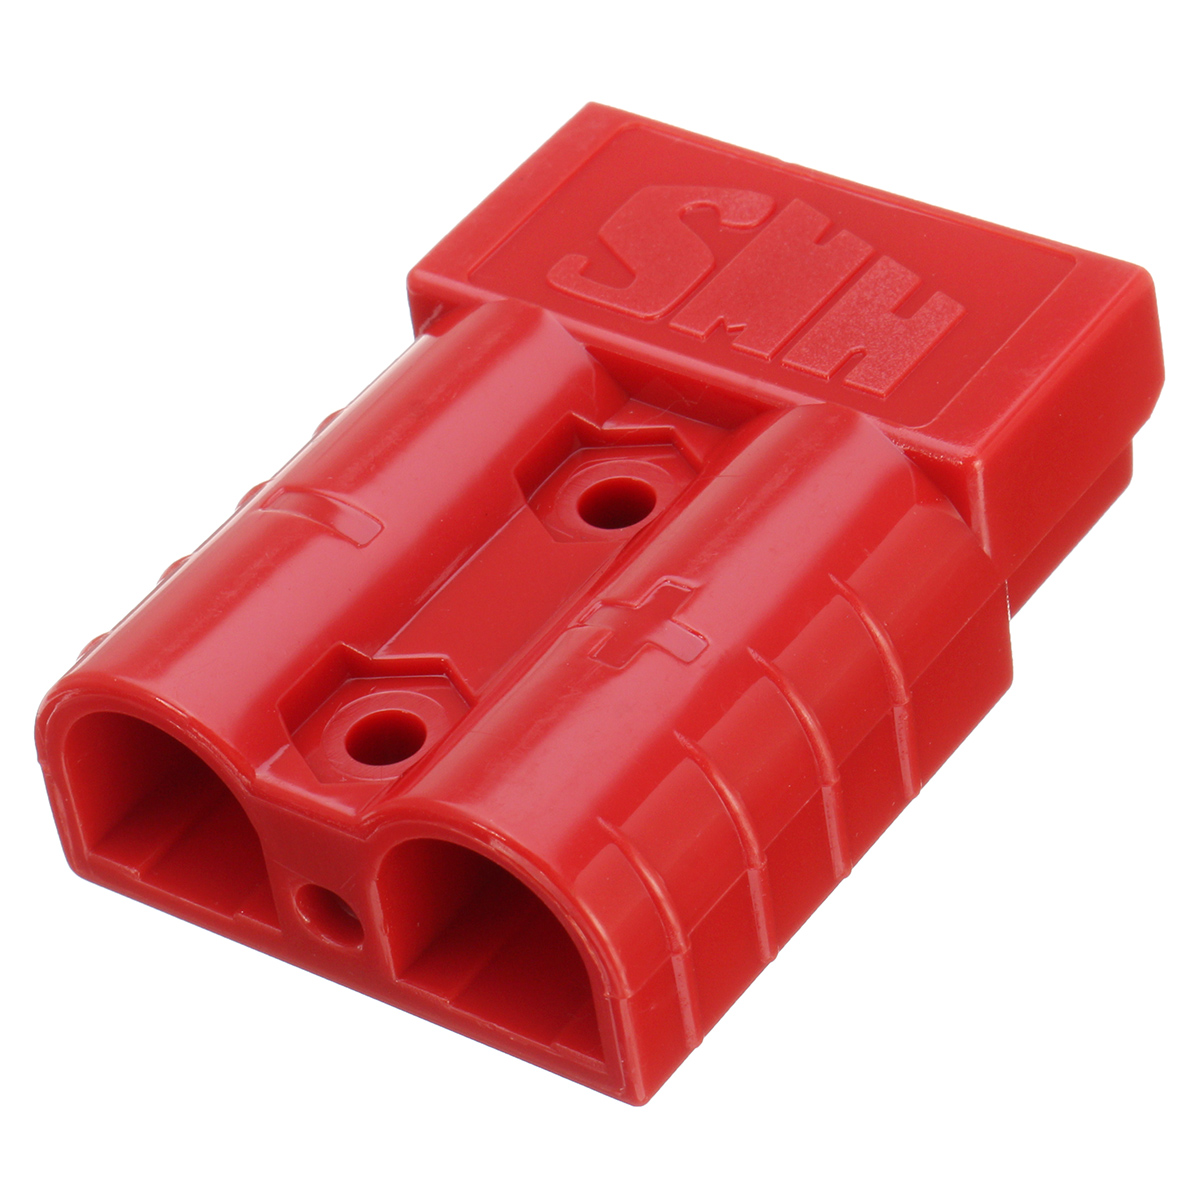 Excellway-50A-8AWG-Battery-Quick-Connector-Plug-Connect-Terminal-Disconnect-Winch-Trailer-Red-1170740-8